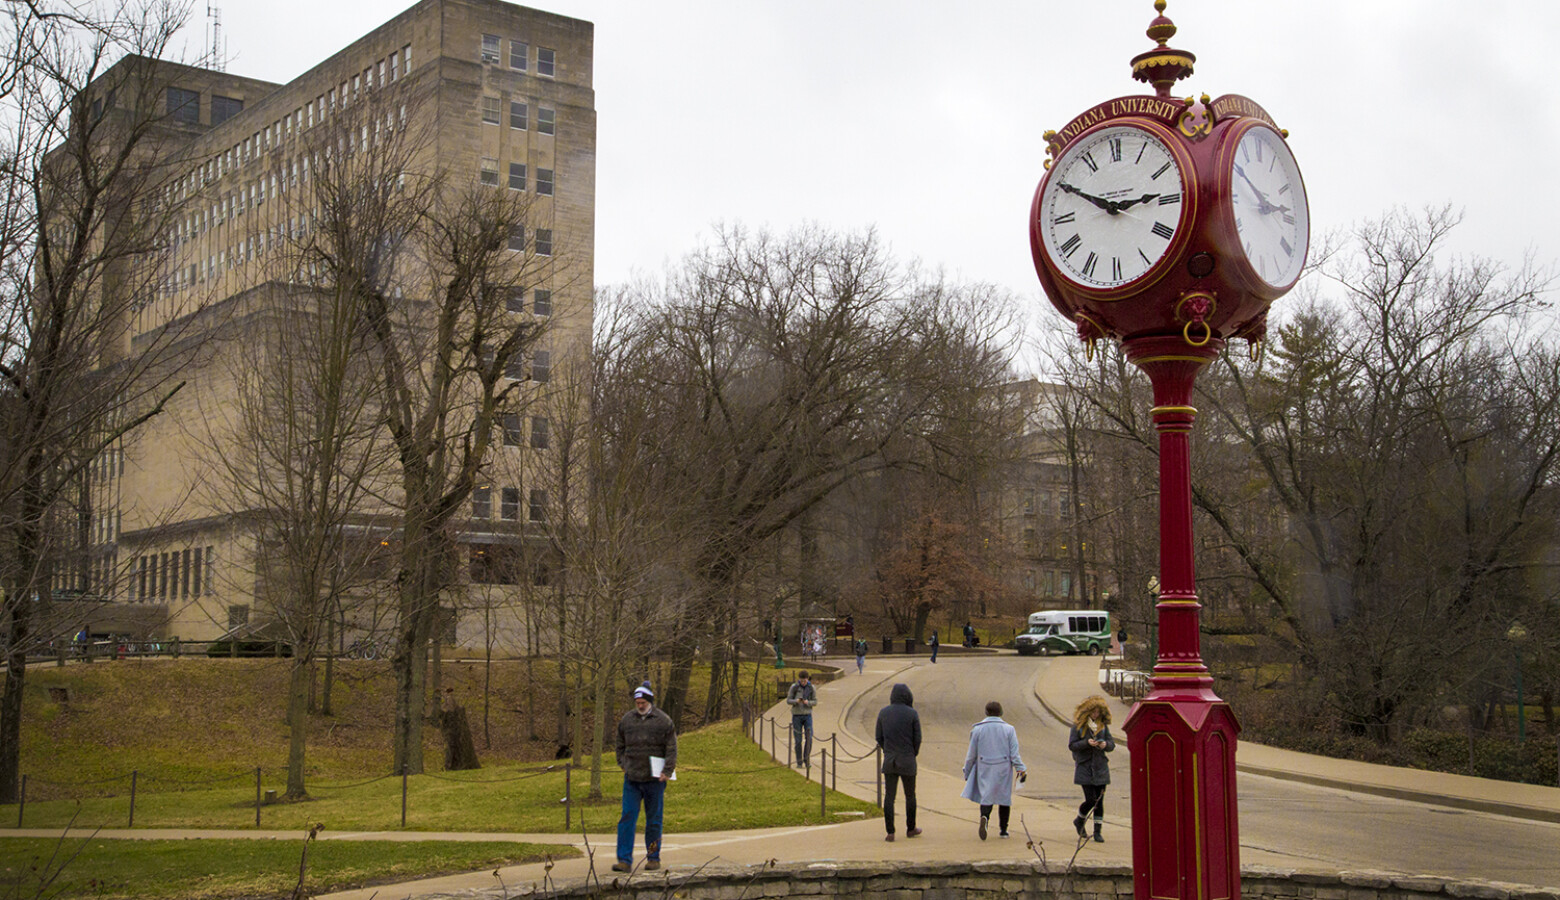 According to state data, more than $45 million of state financial aid was distributed to students at Indiana University Bloomington in 2019. (FILE PHOTO: Peter Balonon-Rosen/IPB News)